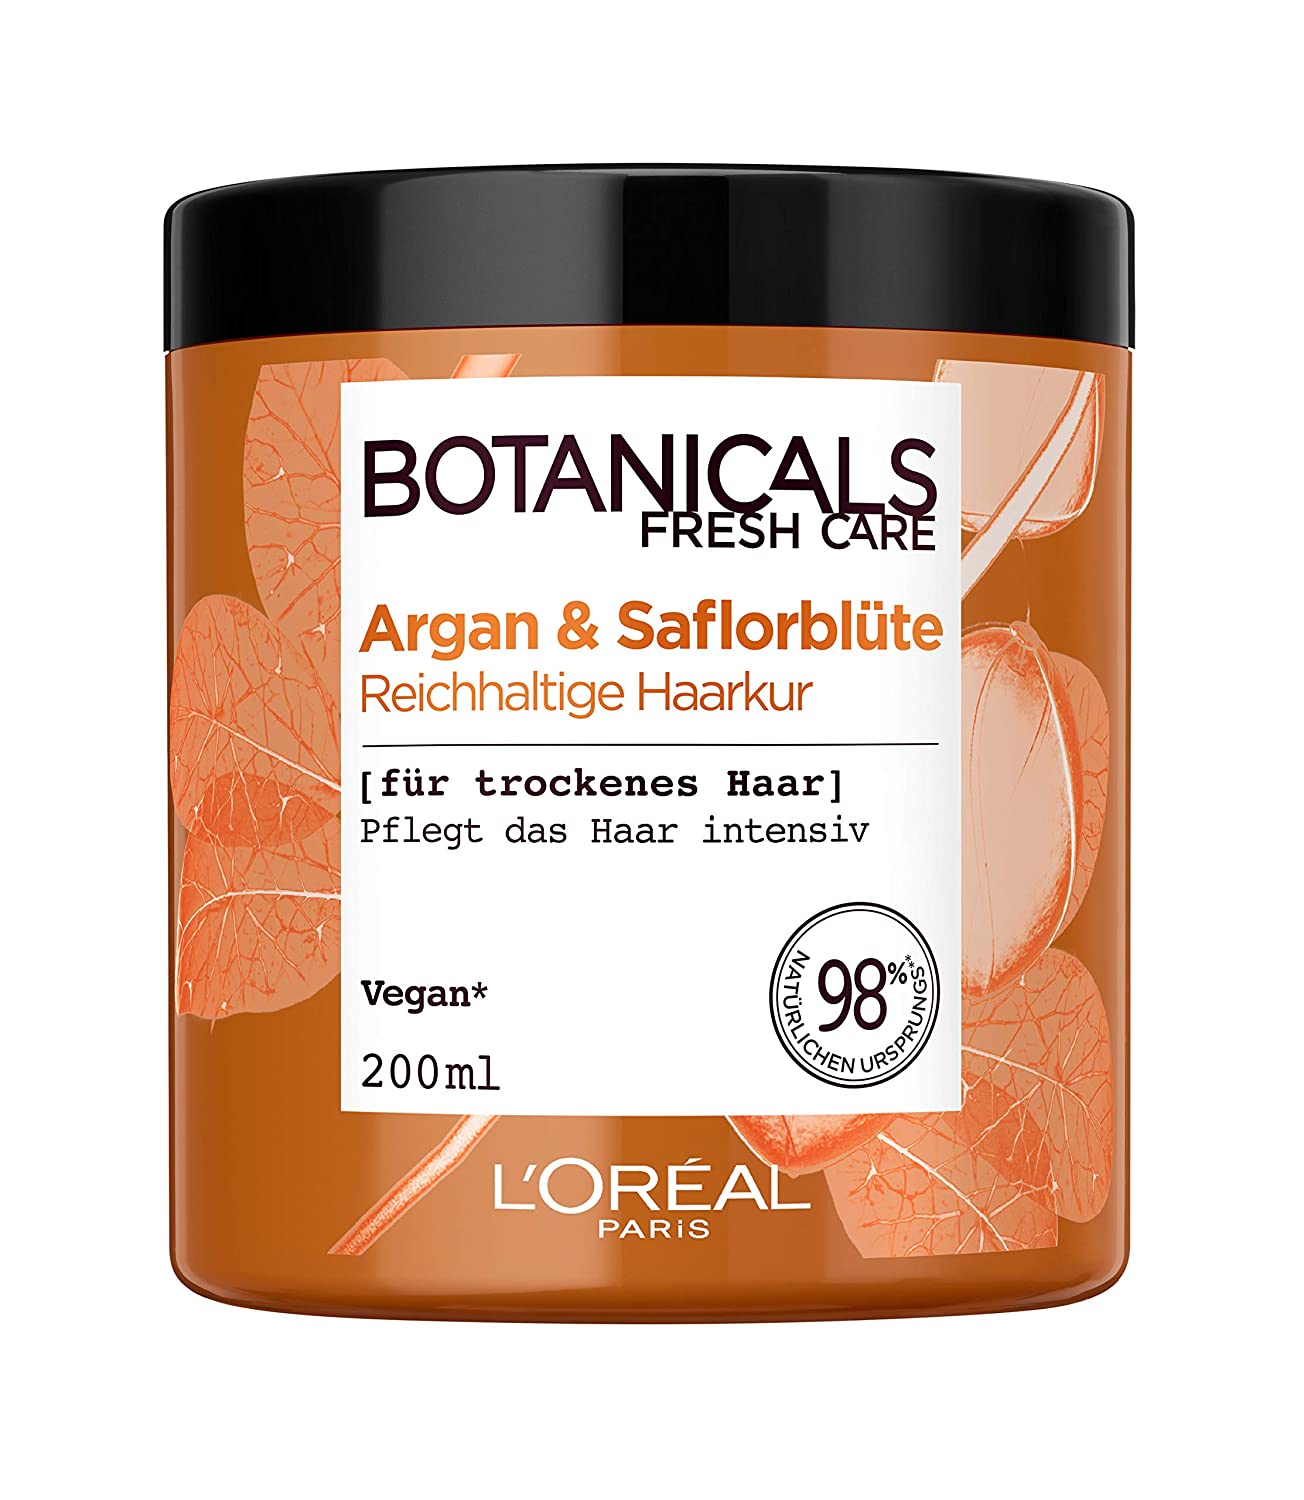 Botanicals Rich Treatment without Silicone for Dry Hair with Argan and Safflorine Blossom Intensively Nourishes Hair (1 x 200 ml)